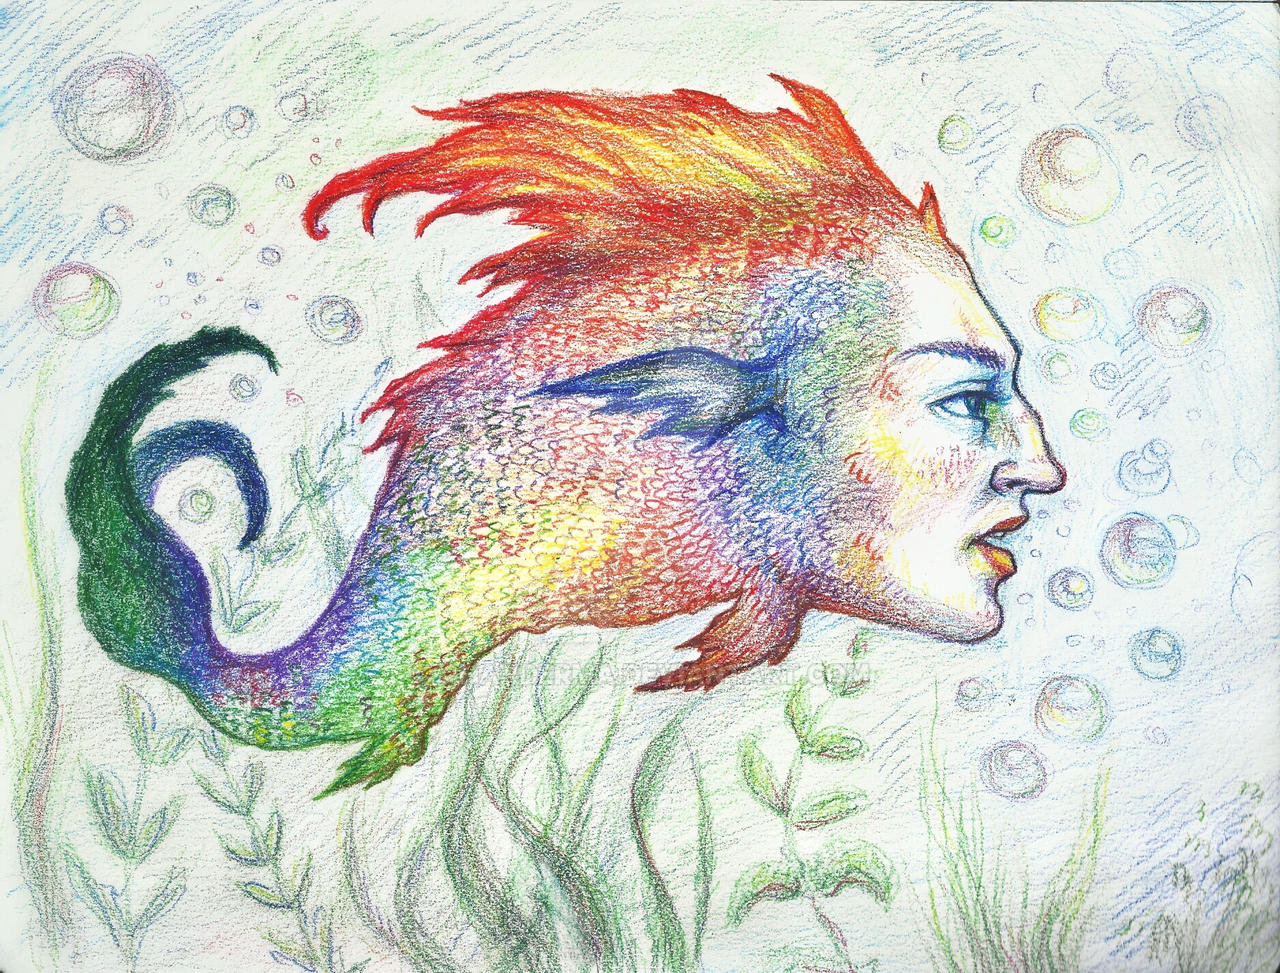 Fish with human face by chanderma on DeviantArt